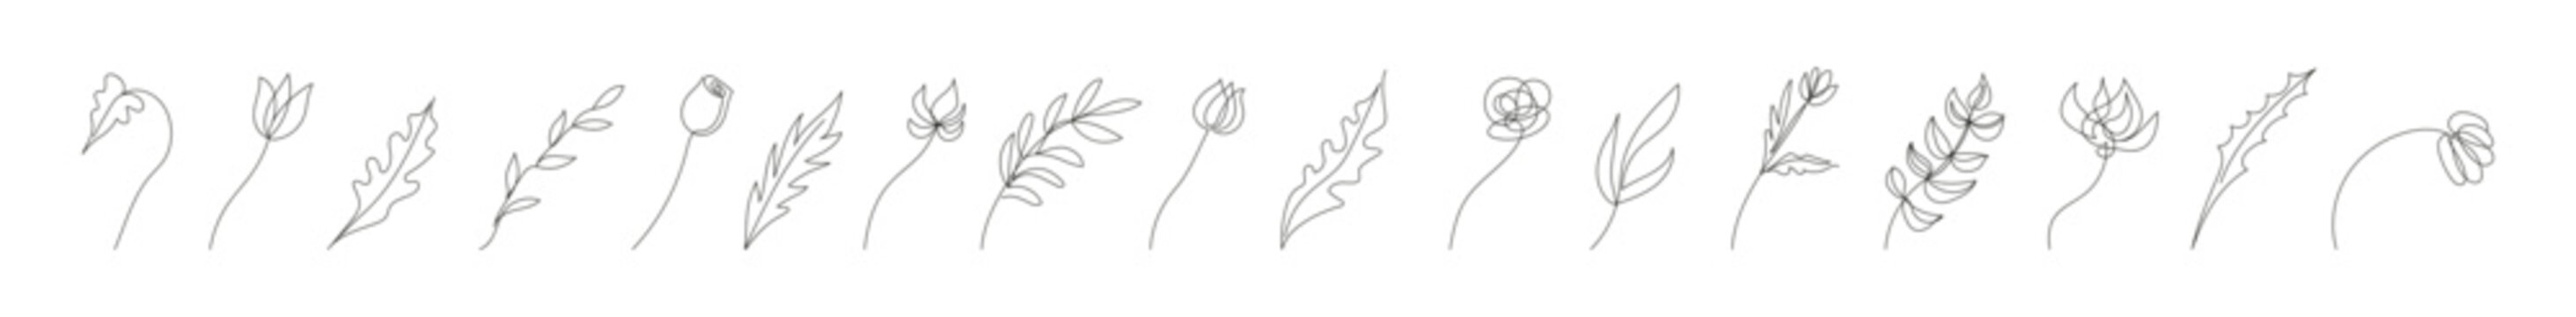 Collection of floral design elements in continuous one line drawing style. Flowers, plants, leaves, branches. Line art. White backdrop. For print, postcard, scrapbooking, coloring book.